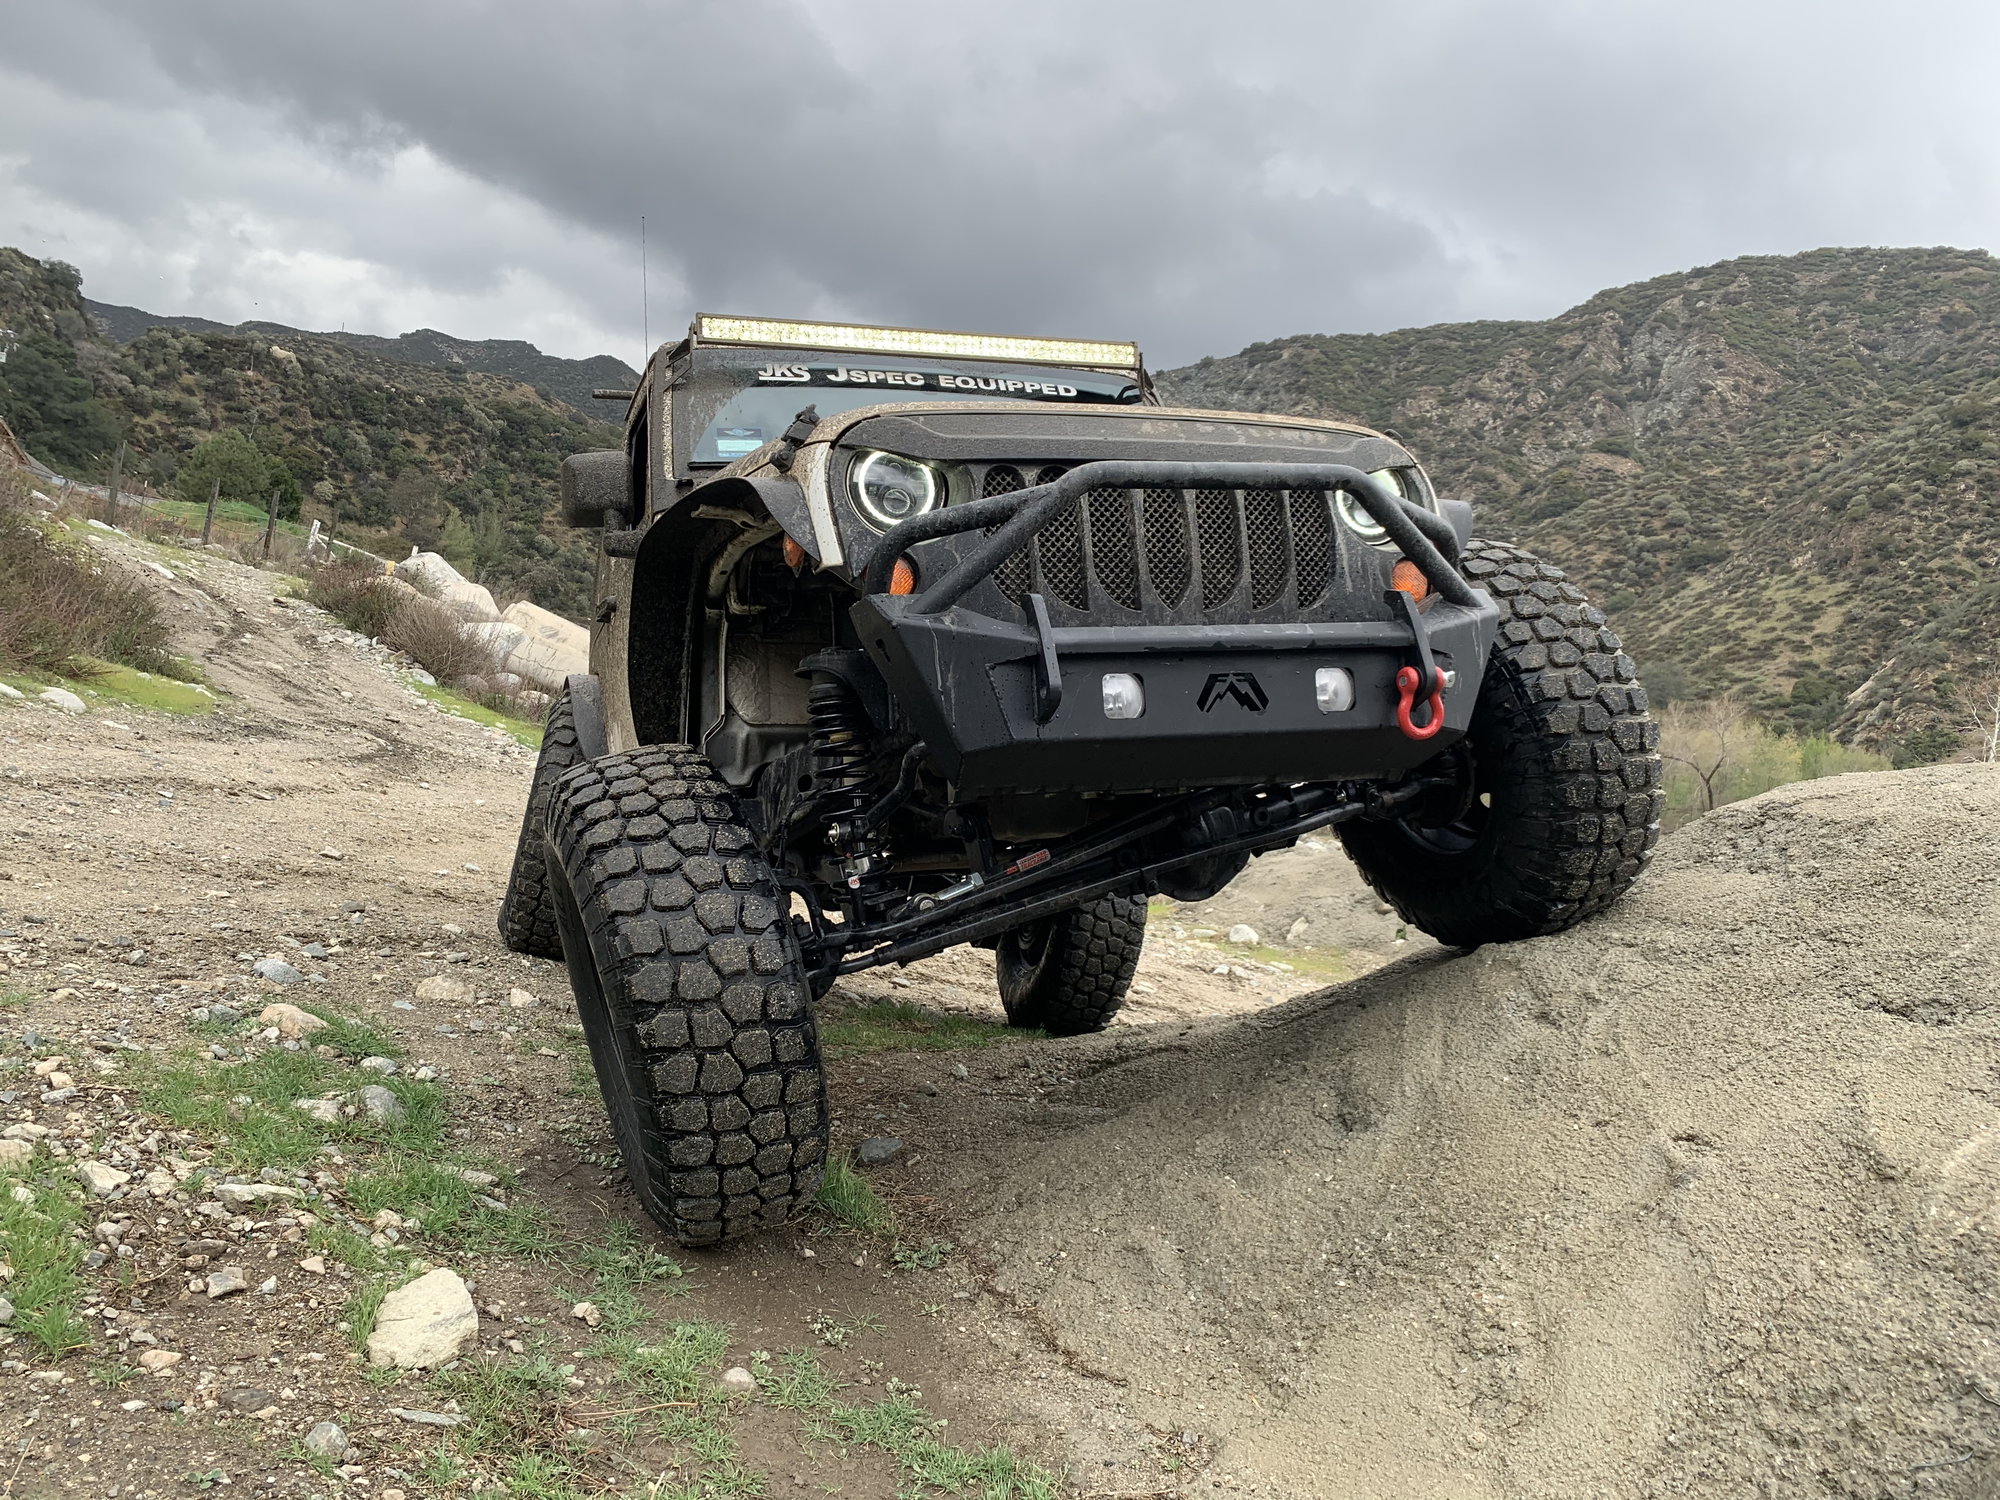 Traction Control Locking Up  - The top destination for Jeep JK  and JL Wrangler news, rumors, and discussion